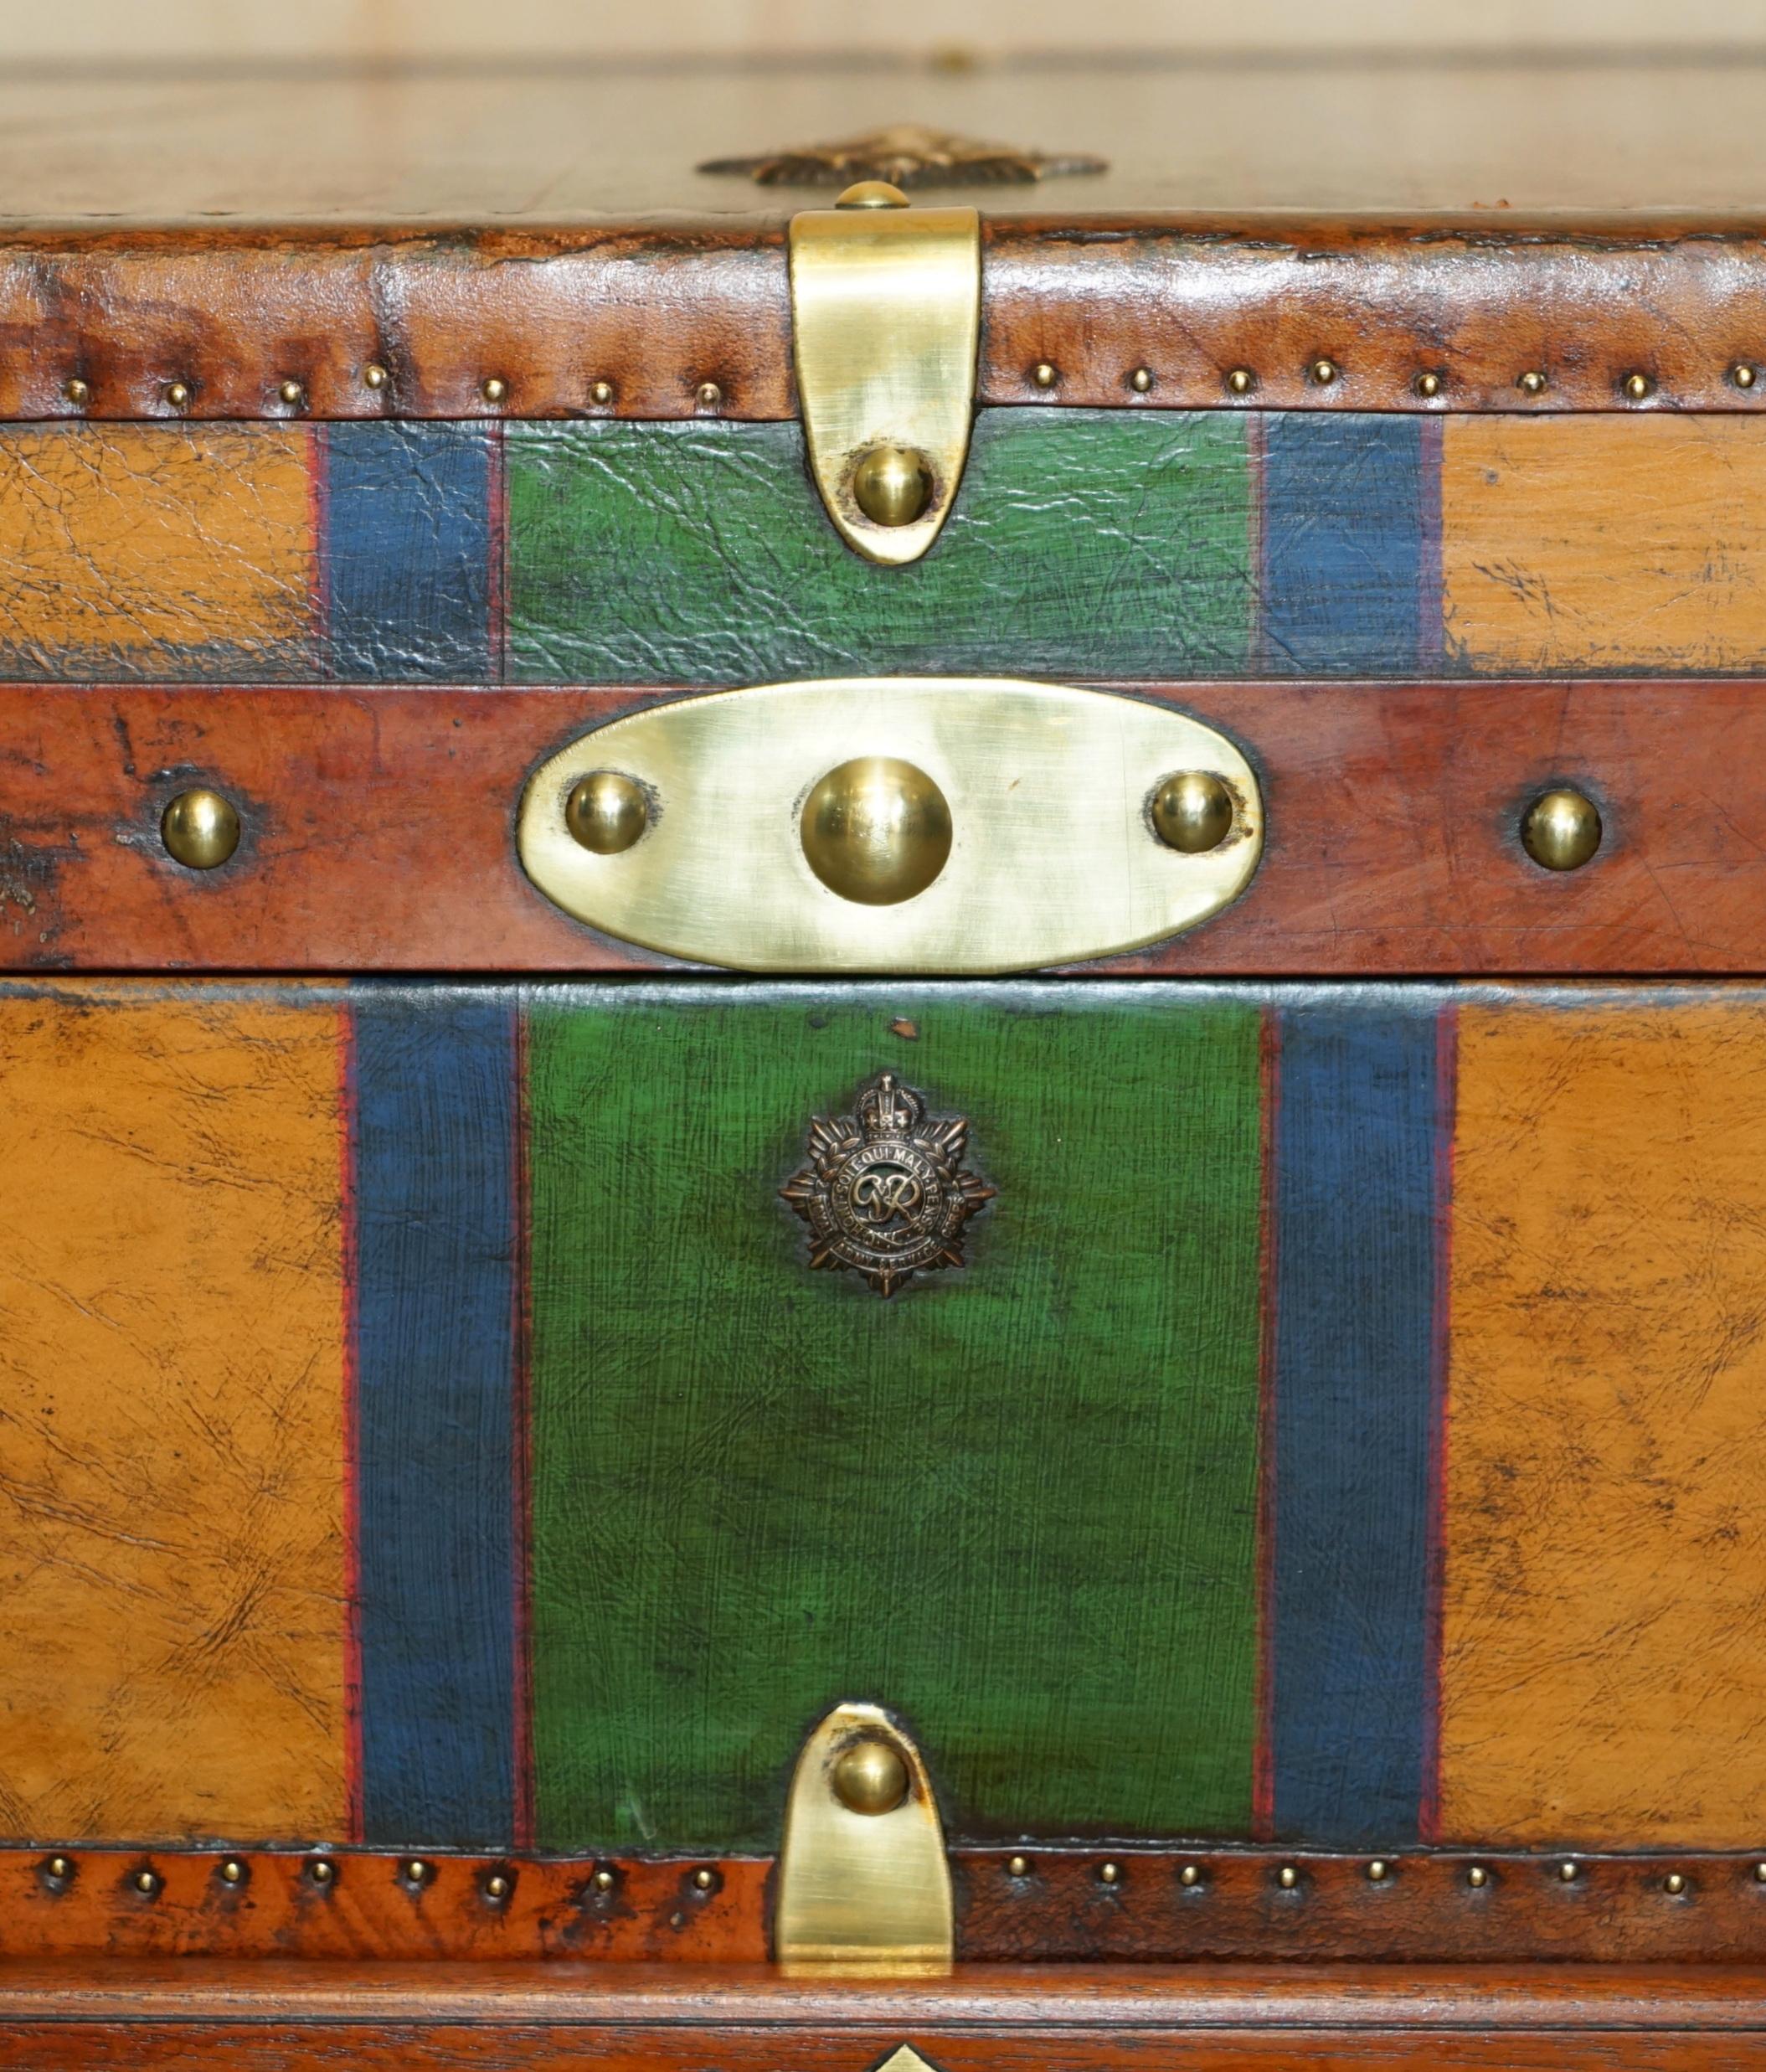 RESTORED BRITISH ARMY BROWN LEATHER TRUNK COFFEE TABLE HONI SOIT QUI MAL Y PENSe For Sale 5